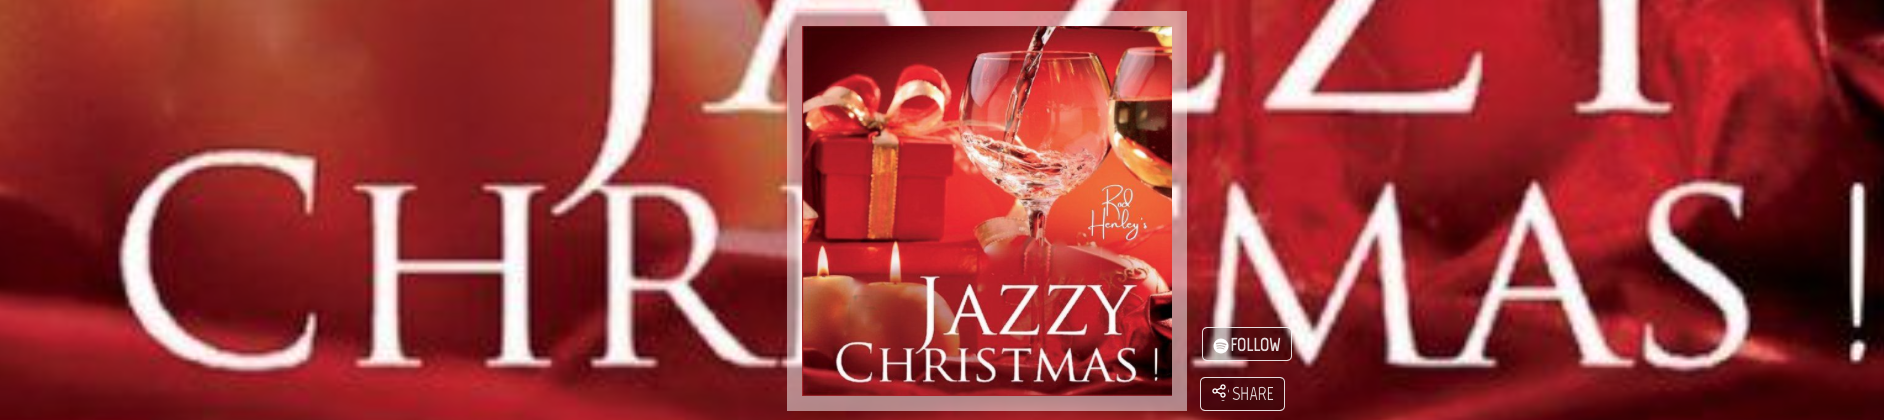 Rod Henley and the jazzmin vocal band Jazzy Christmas